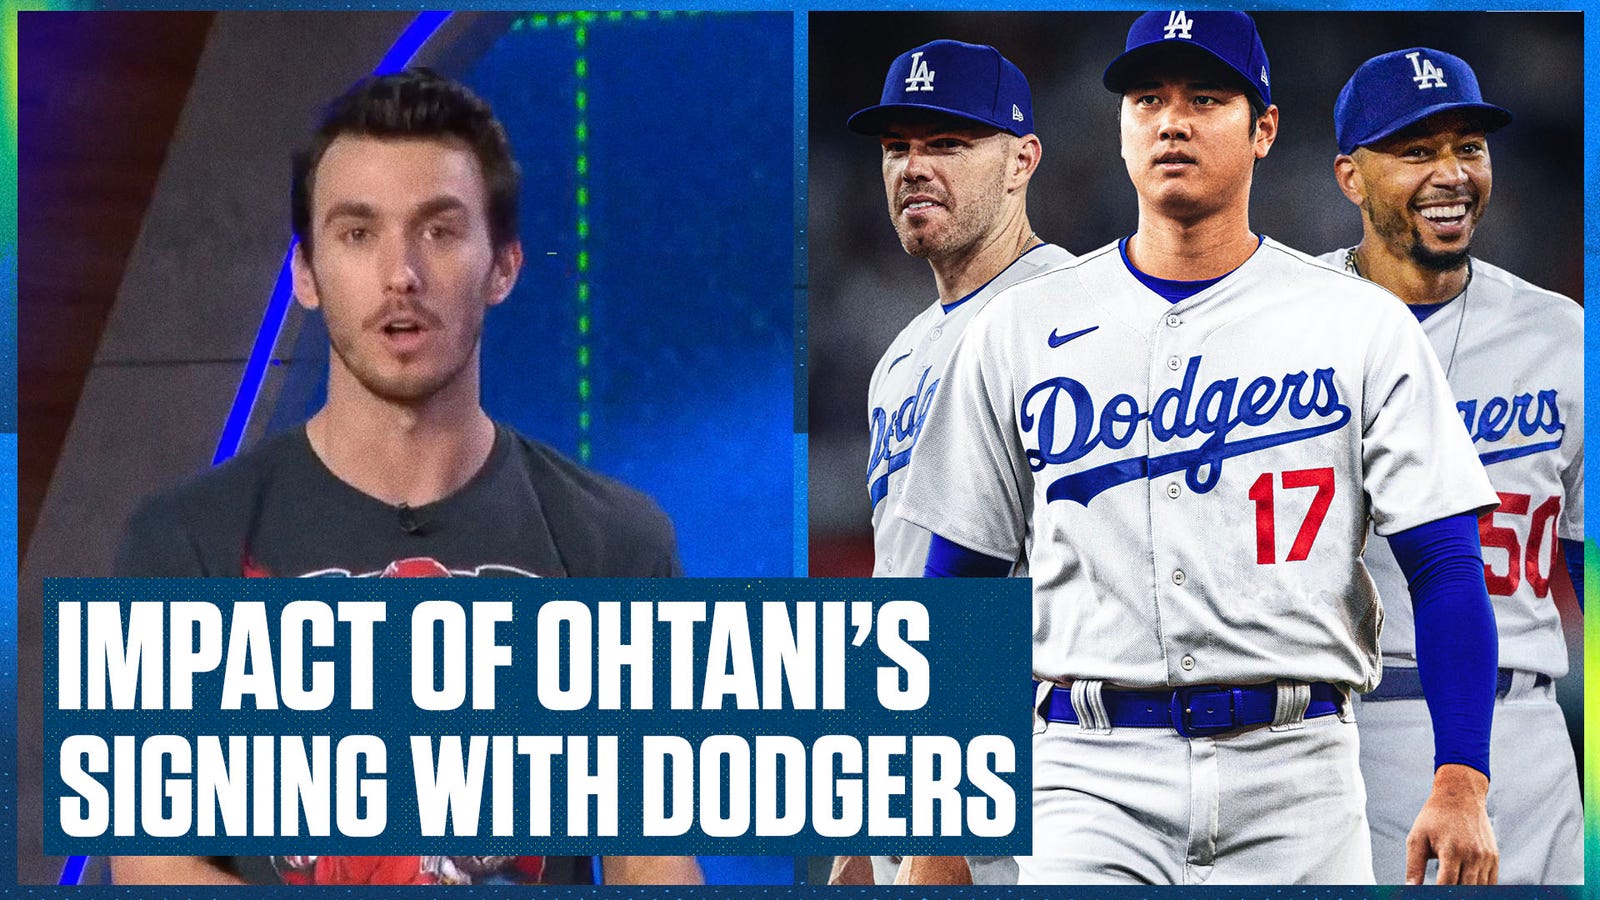 What does Shohei Ohtani's signing mean for the Dodgers?